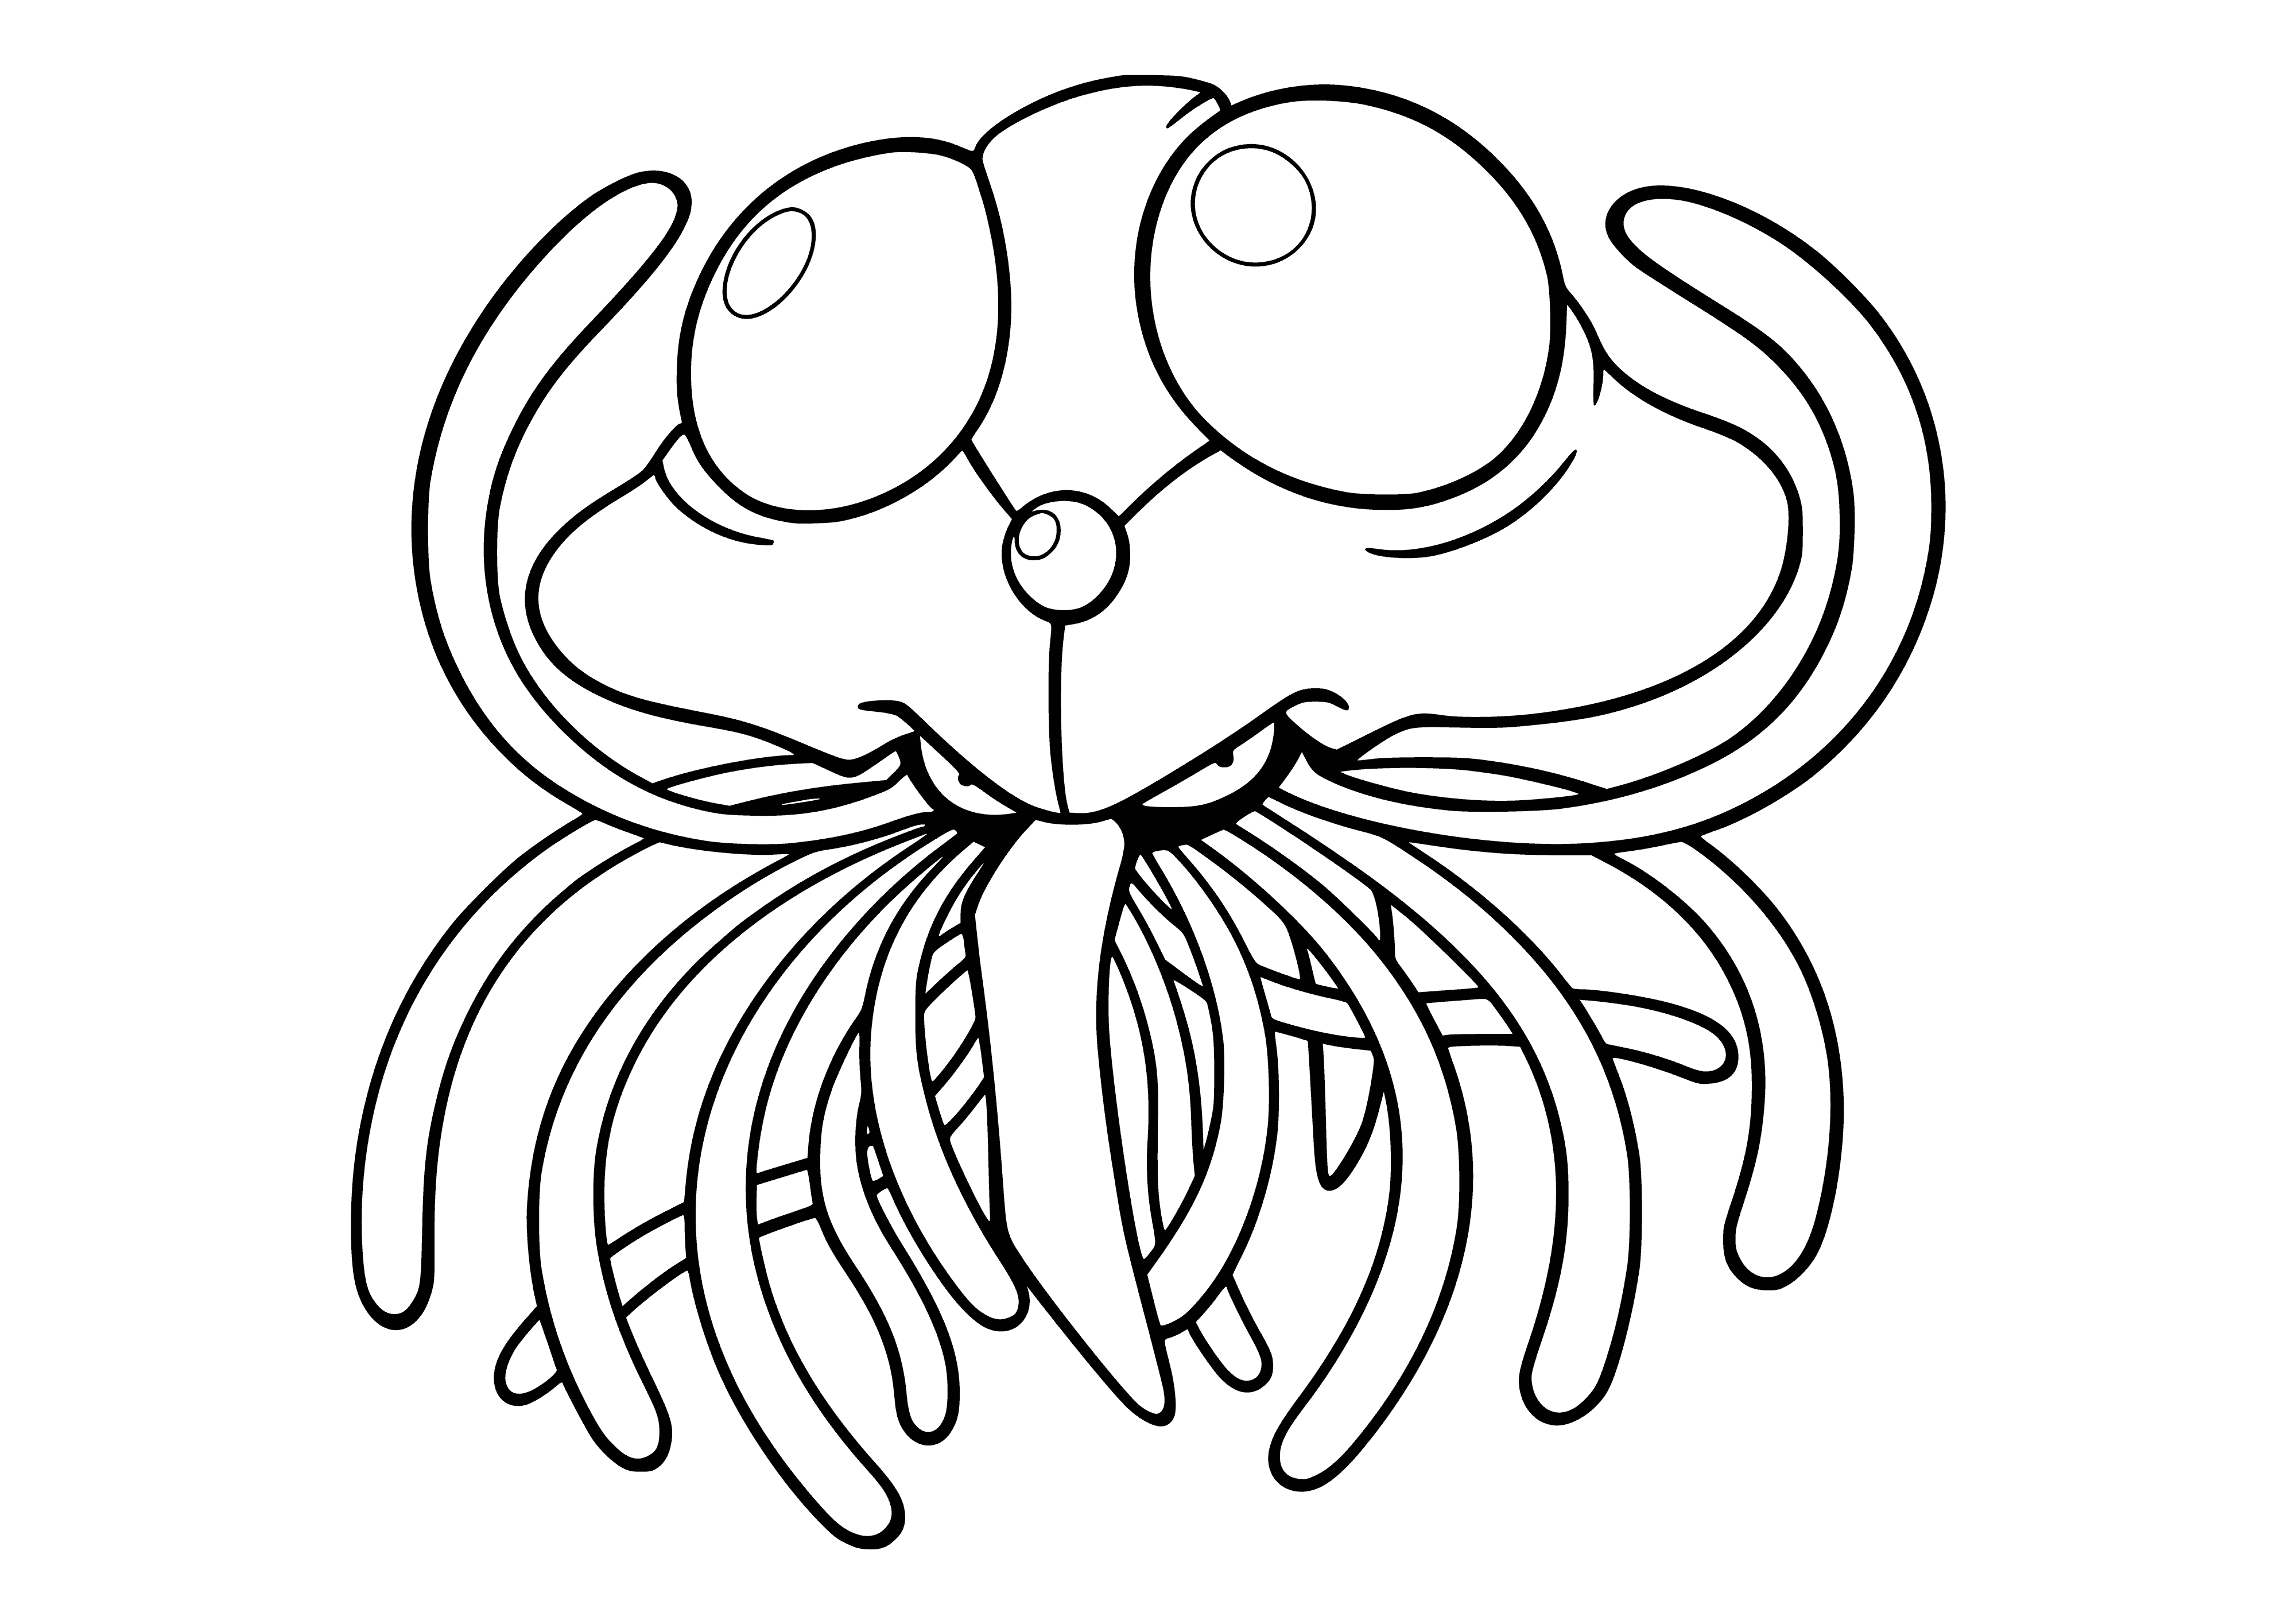 coloring page: Colorable Tentacruel Pokemons with black body, white belly, many tentacles and red eyes. Perfect for you budding trainers! #Pokemon